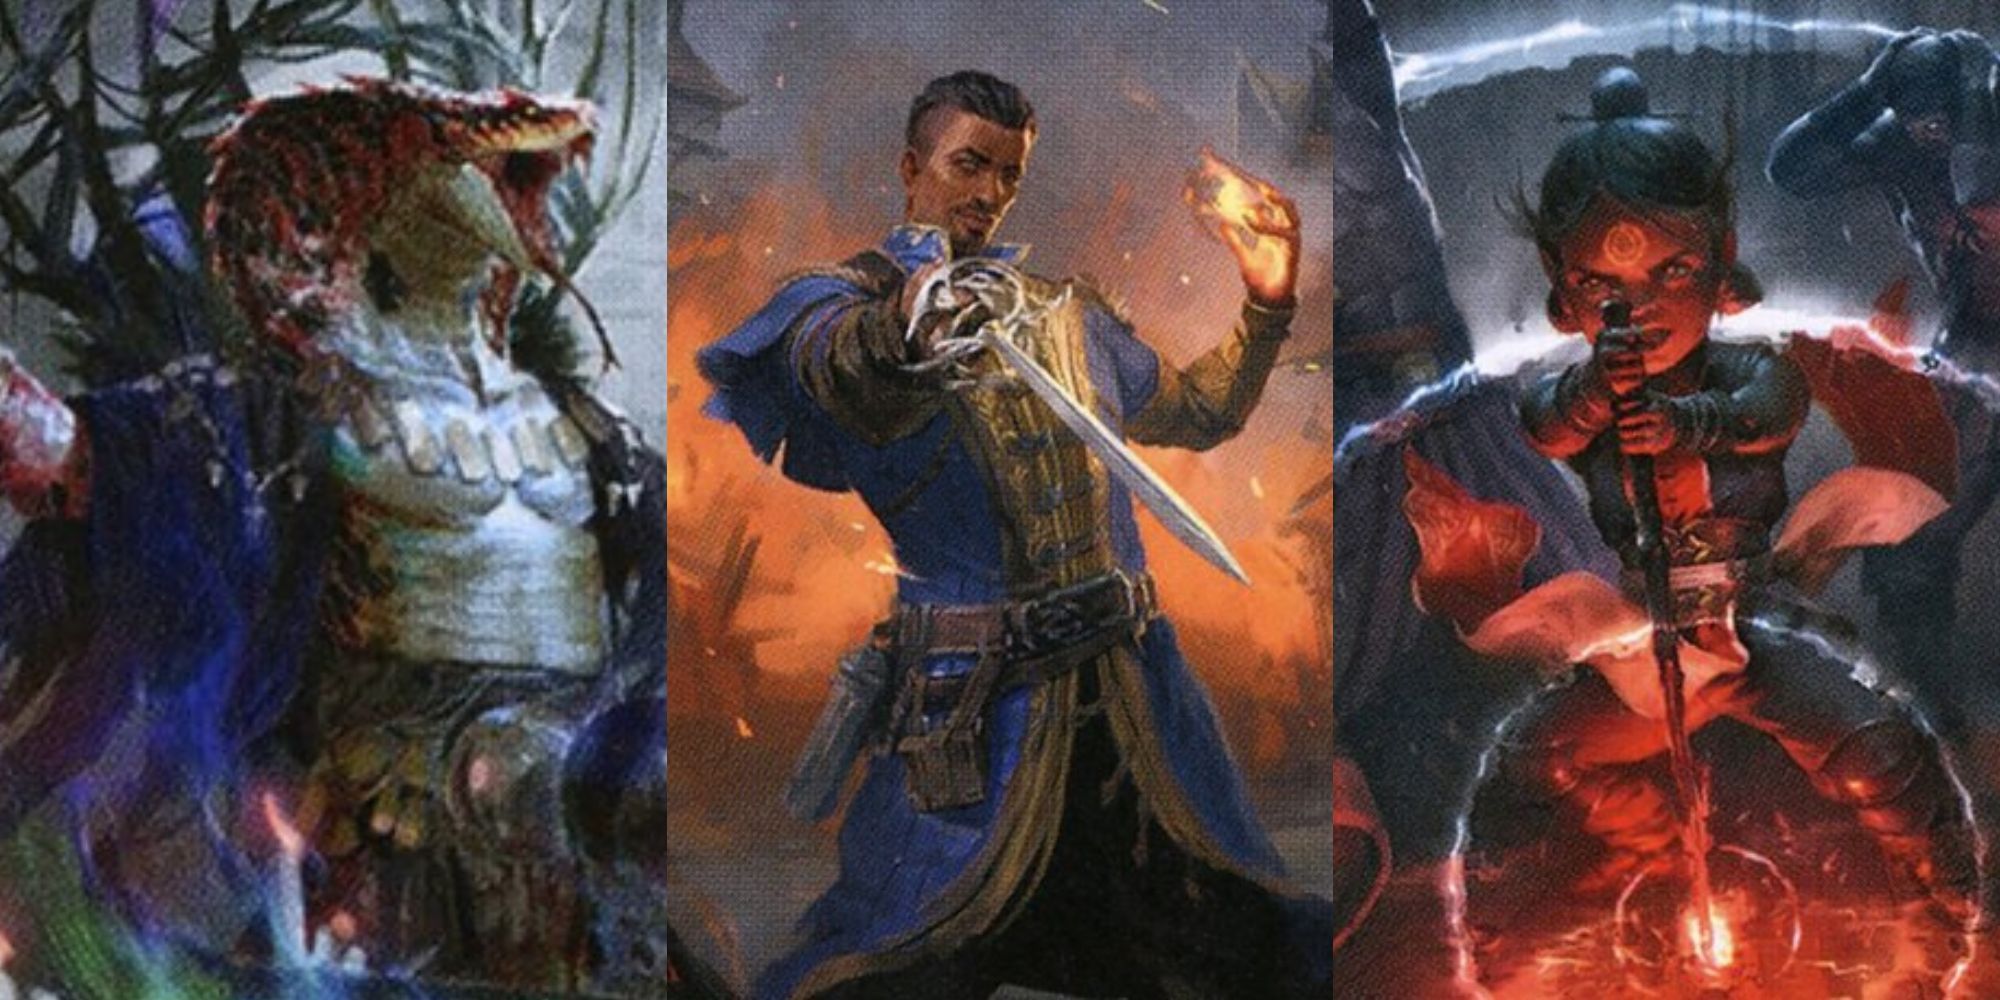 A collage of Dungeons & Dragons warlocks: a Yuan-ti, a human, and a gnome, casting magic.